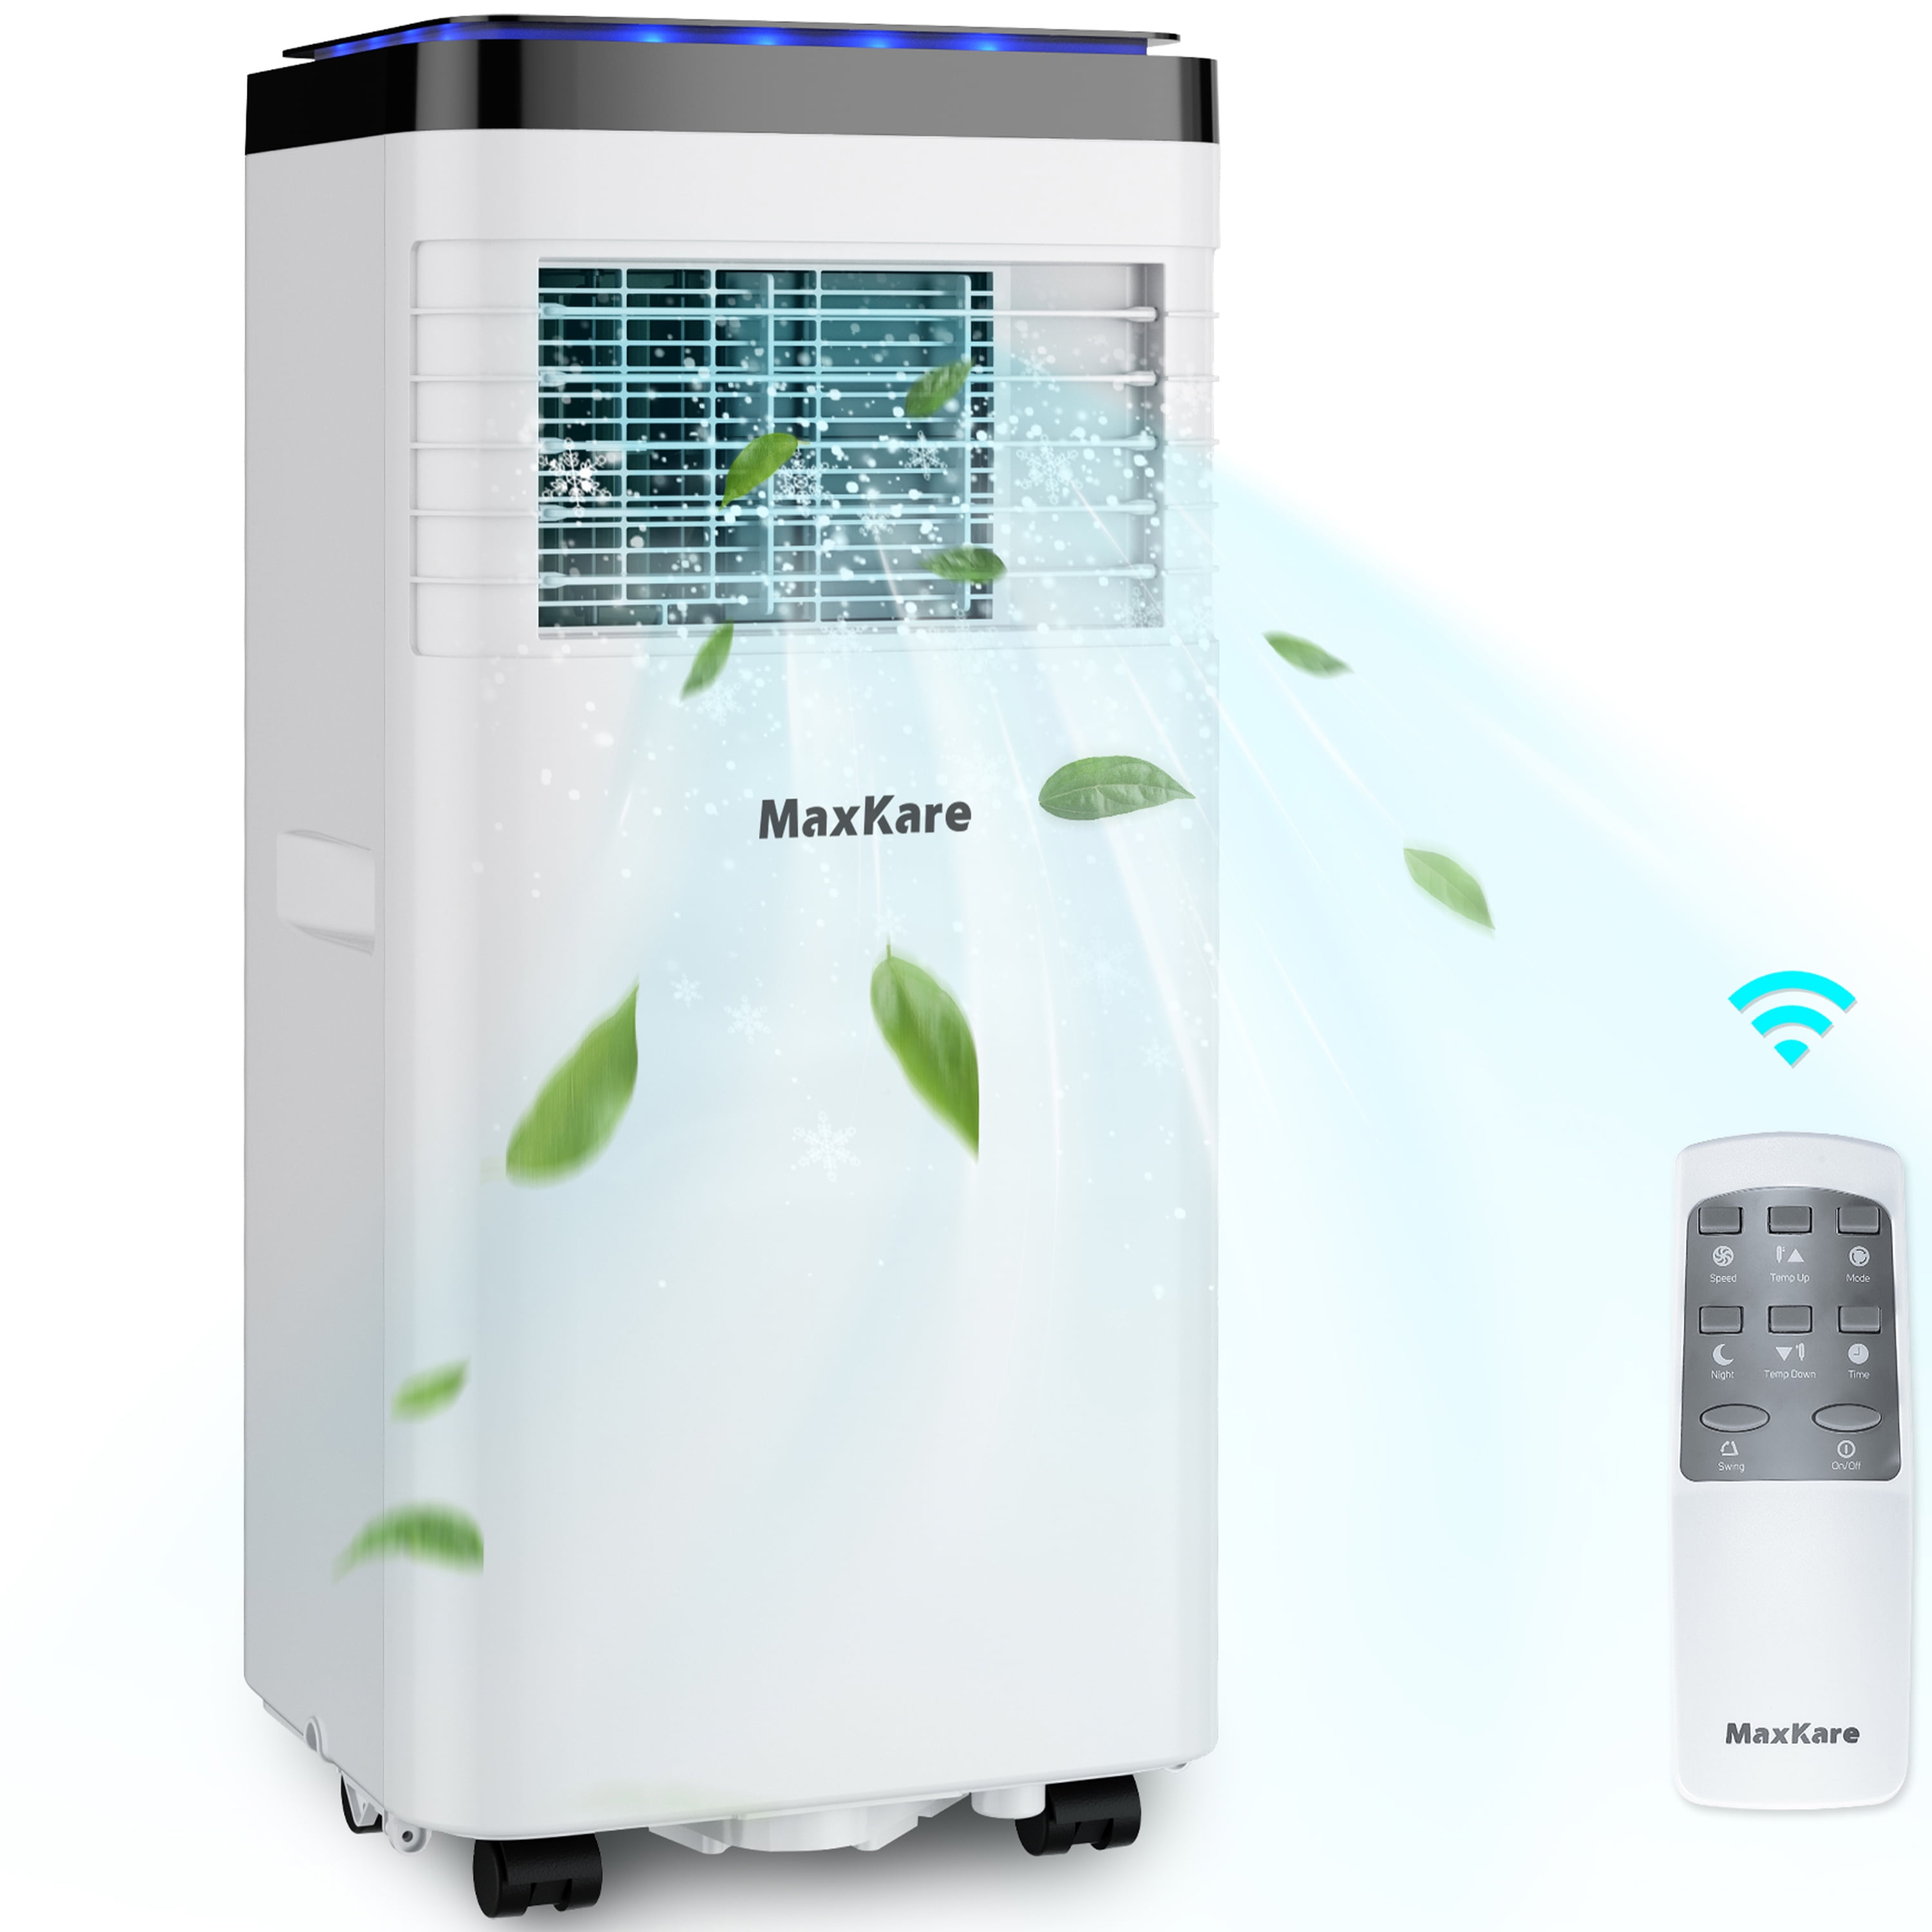 MaxKare Portable Air Conditioner, 8000 BTU with Cooler, Dehumidifier  Cooling Rooms up to 150 Sq.ft with Remote Control